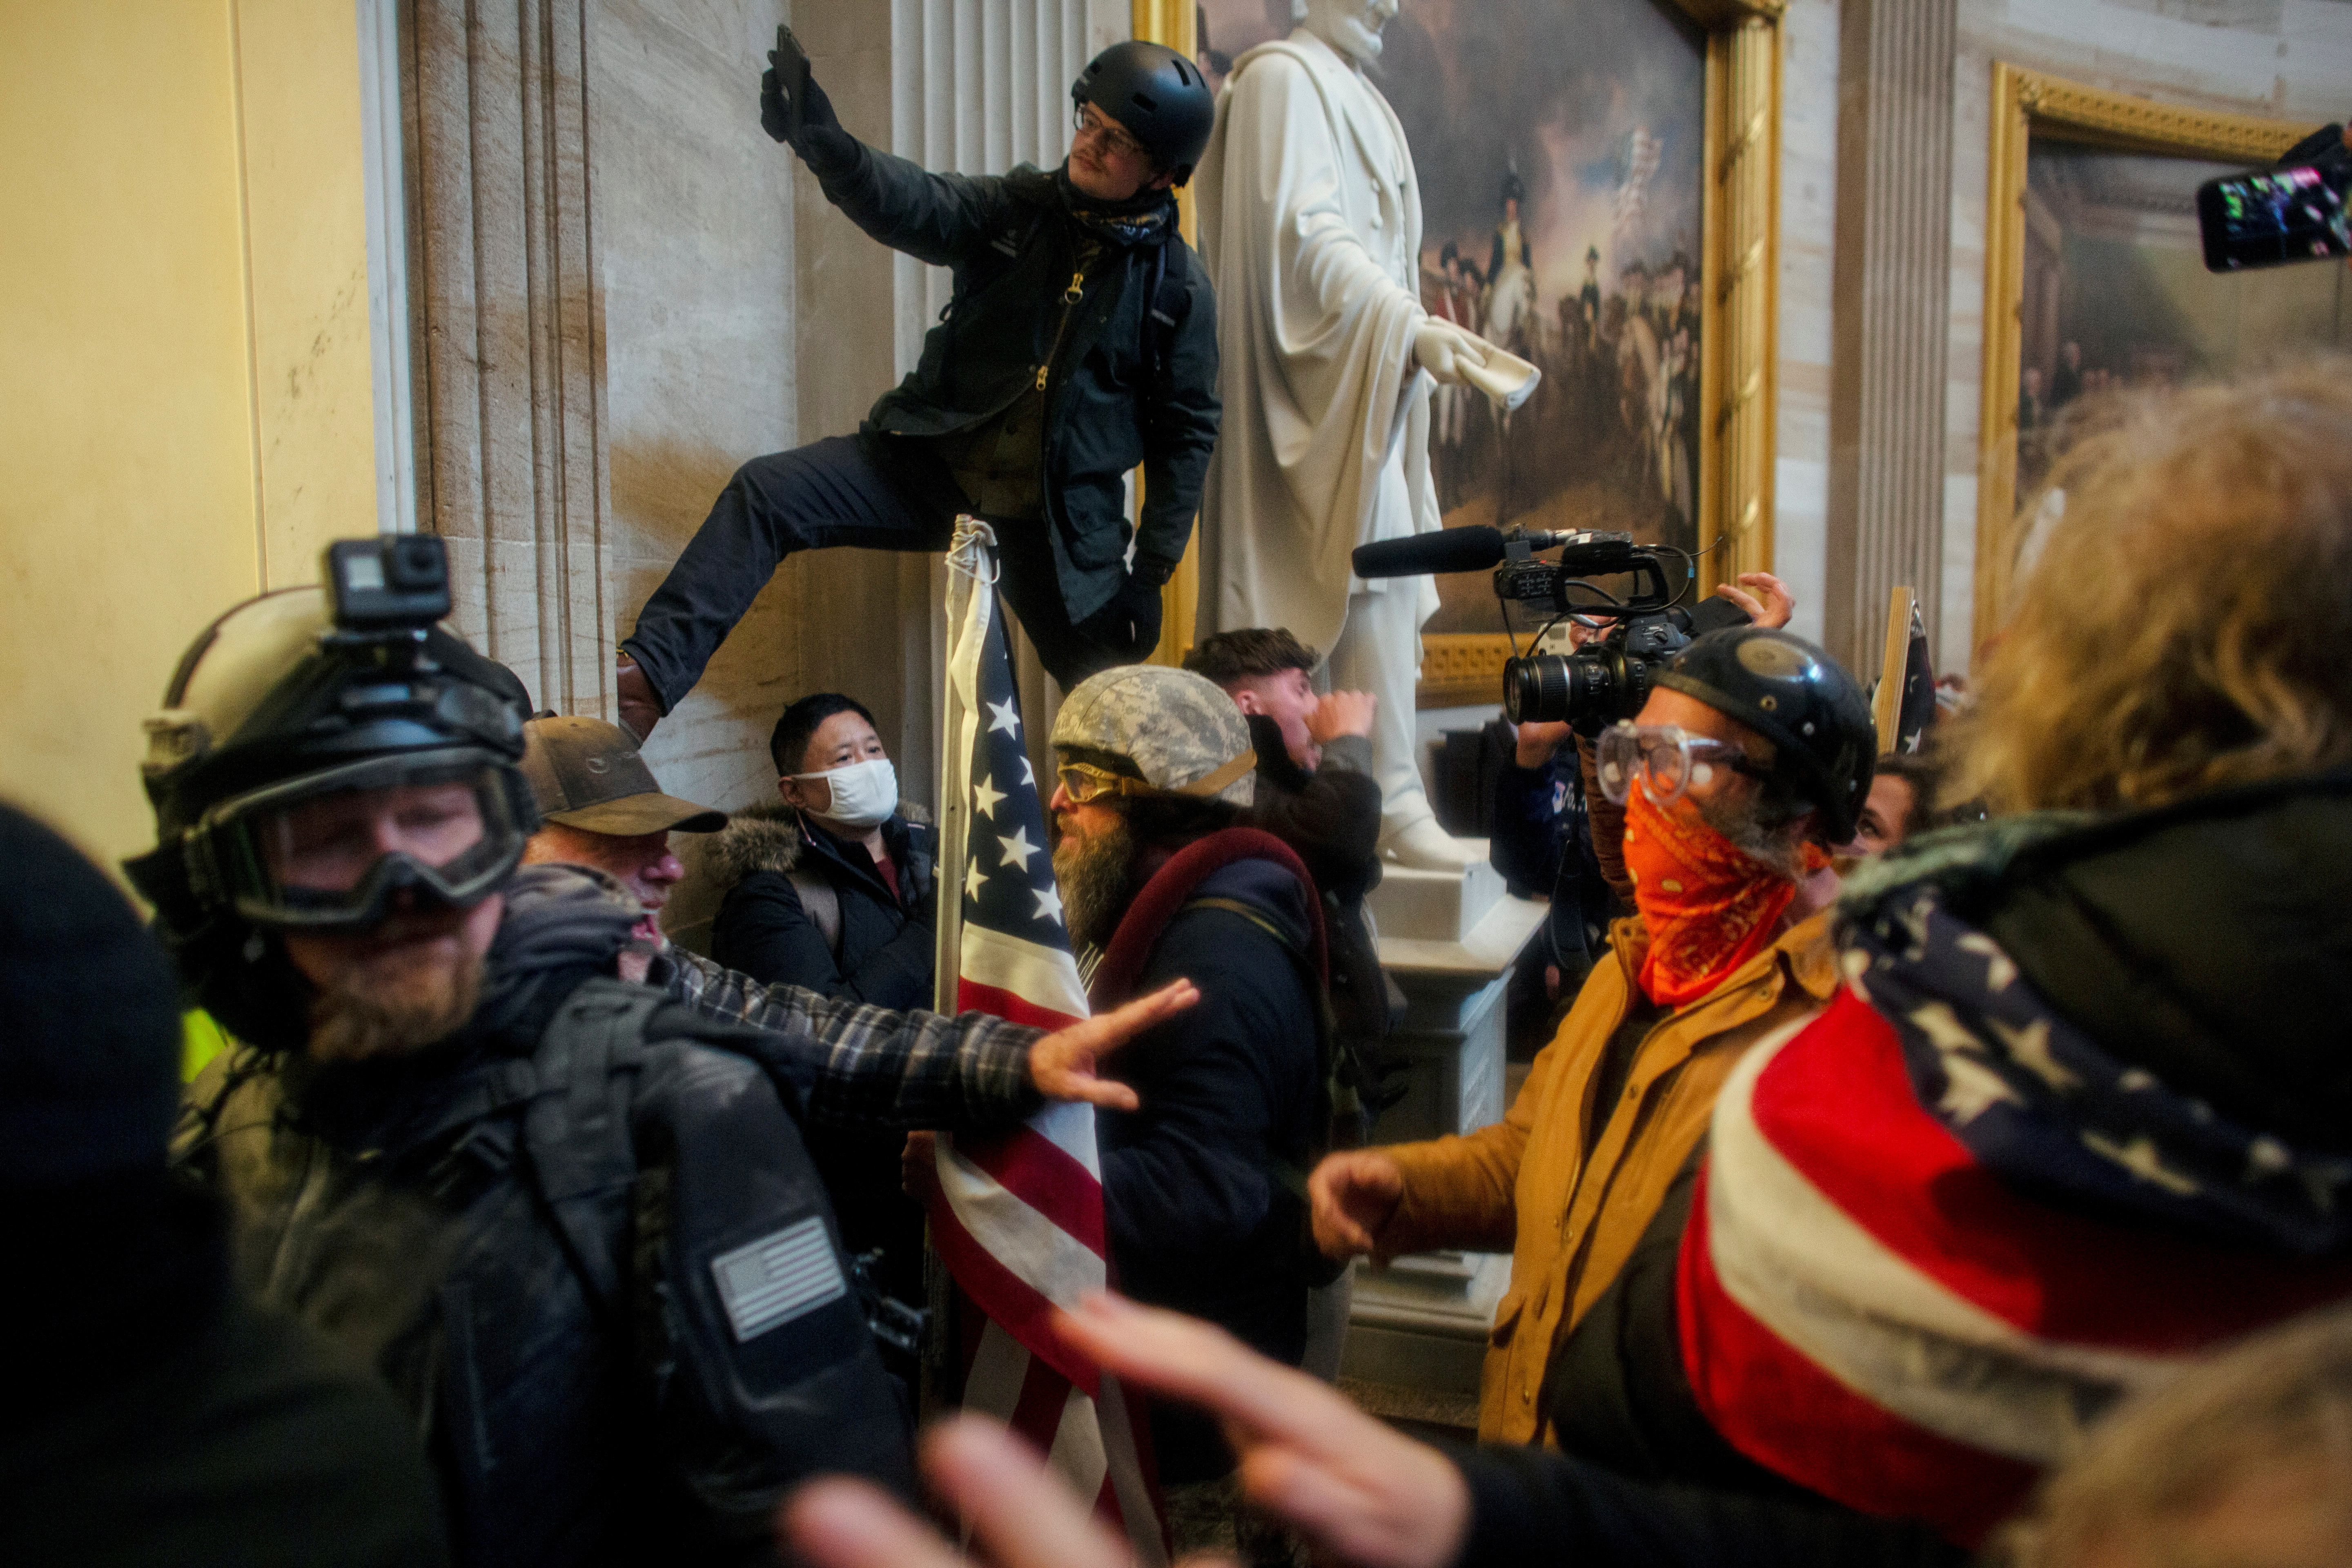 Pro-Trump protesters storm the U.S. Capitol to contest the certification of the 2020 U.S. presidential election results by the U.S. Congress, at the U.S. Capitol Building in Washington, D.C., U.S. January 6, 2021. REUTERS/Ahmed Gaber